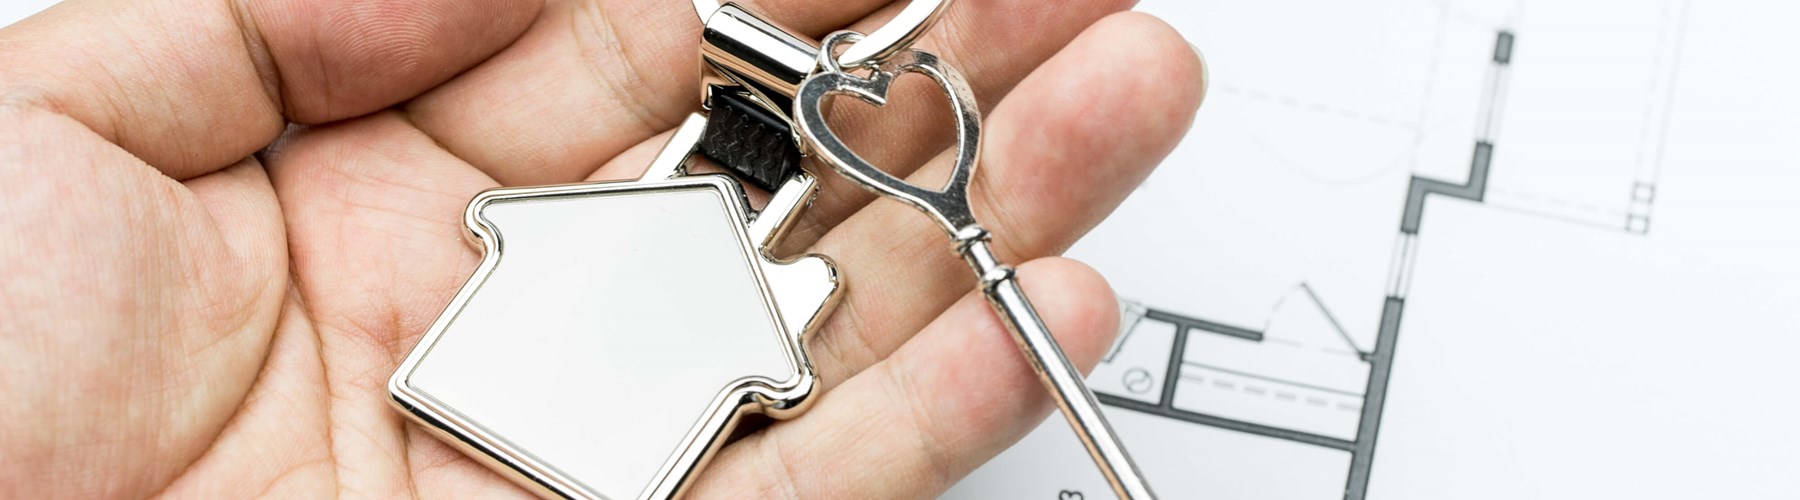 Hand holding a silver key with a house key ring